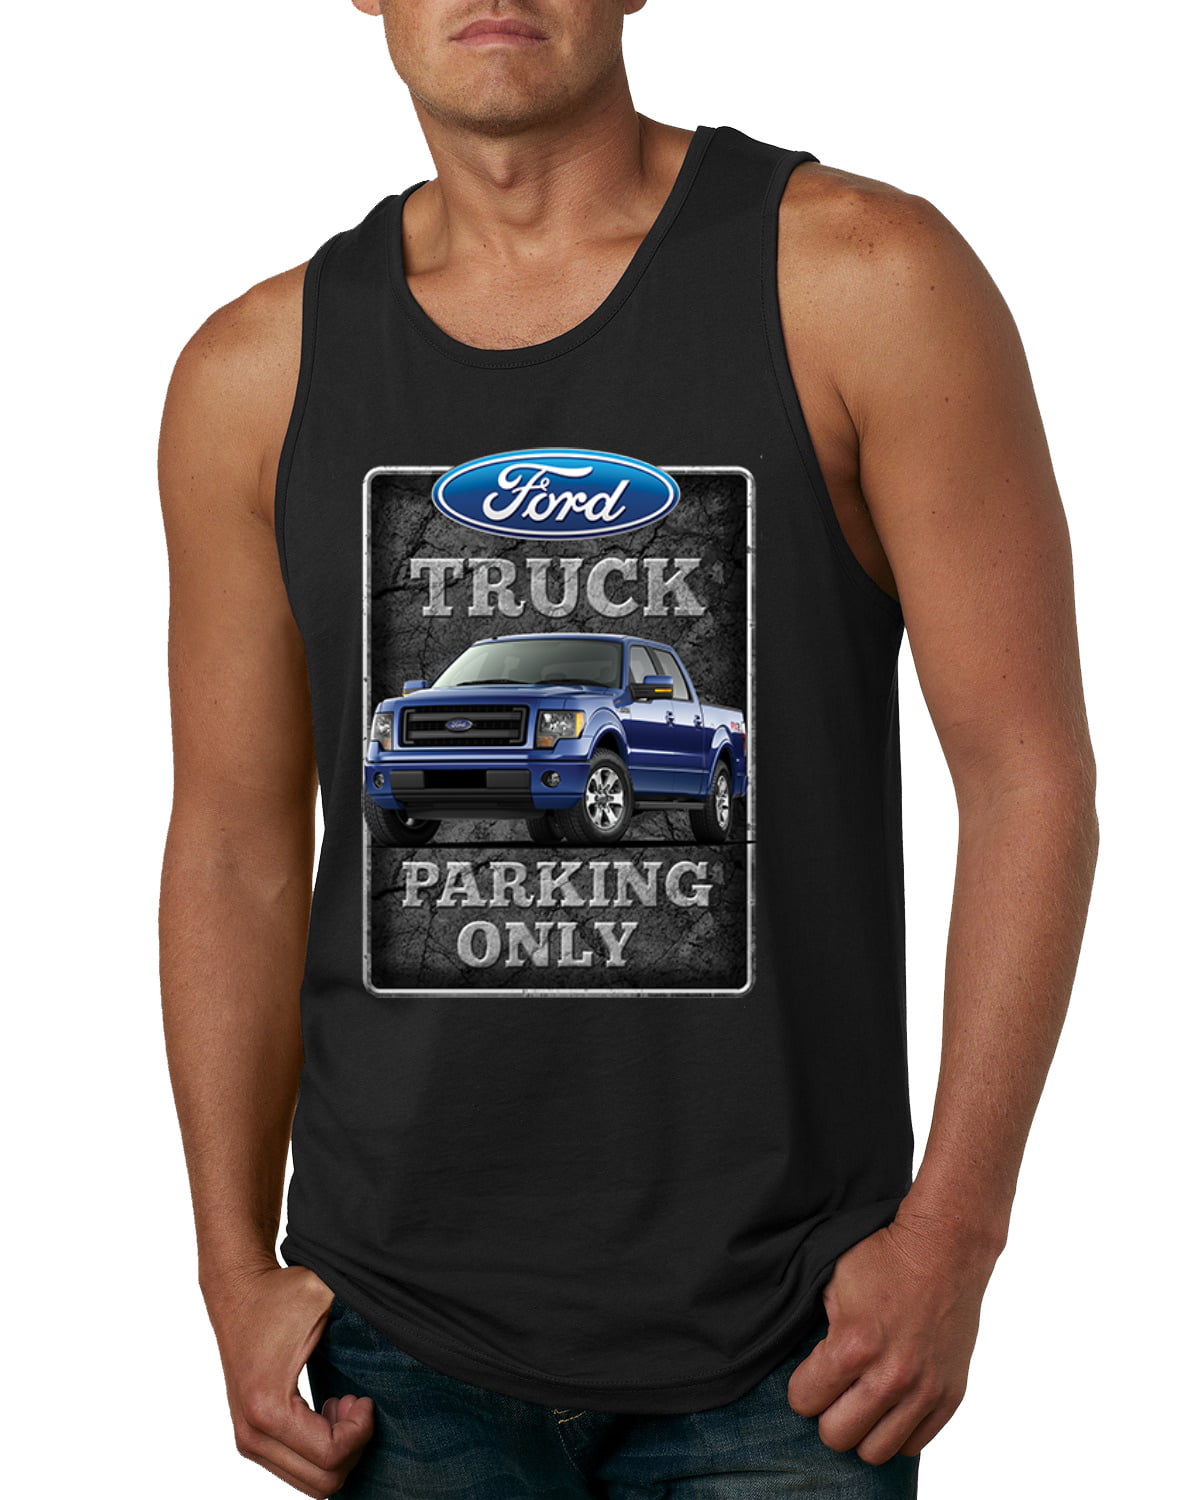 Ford Genuine Parts Tank Top American Classic Muscle Cars V8 Motor Sleeveless